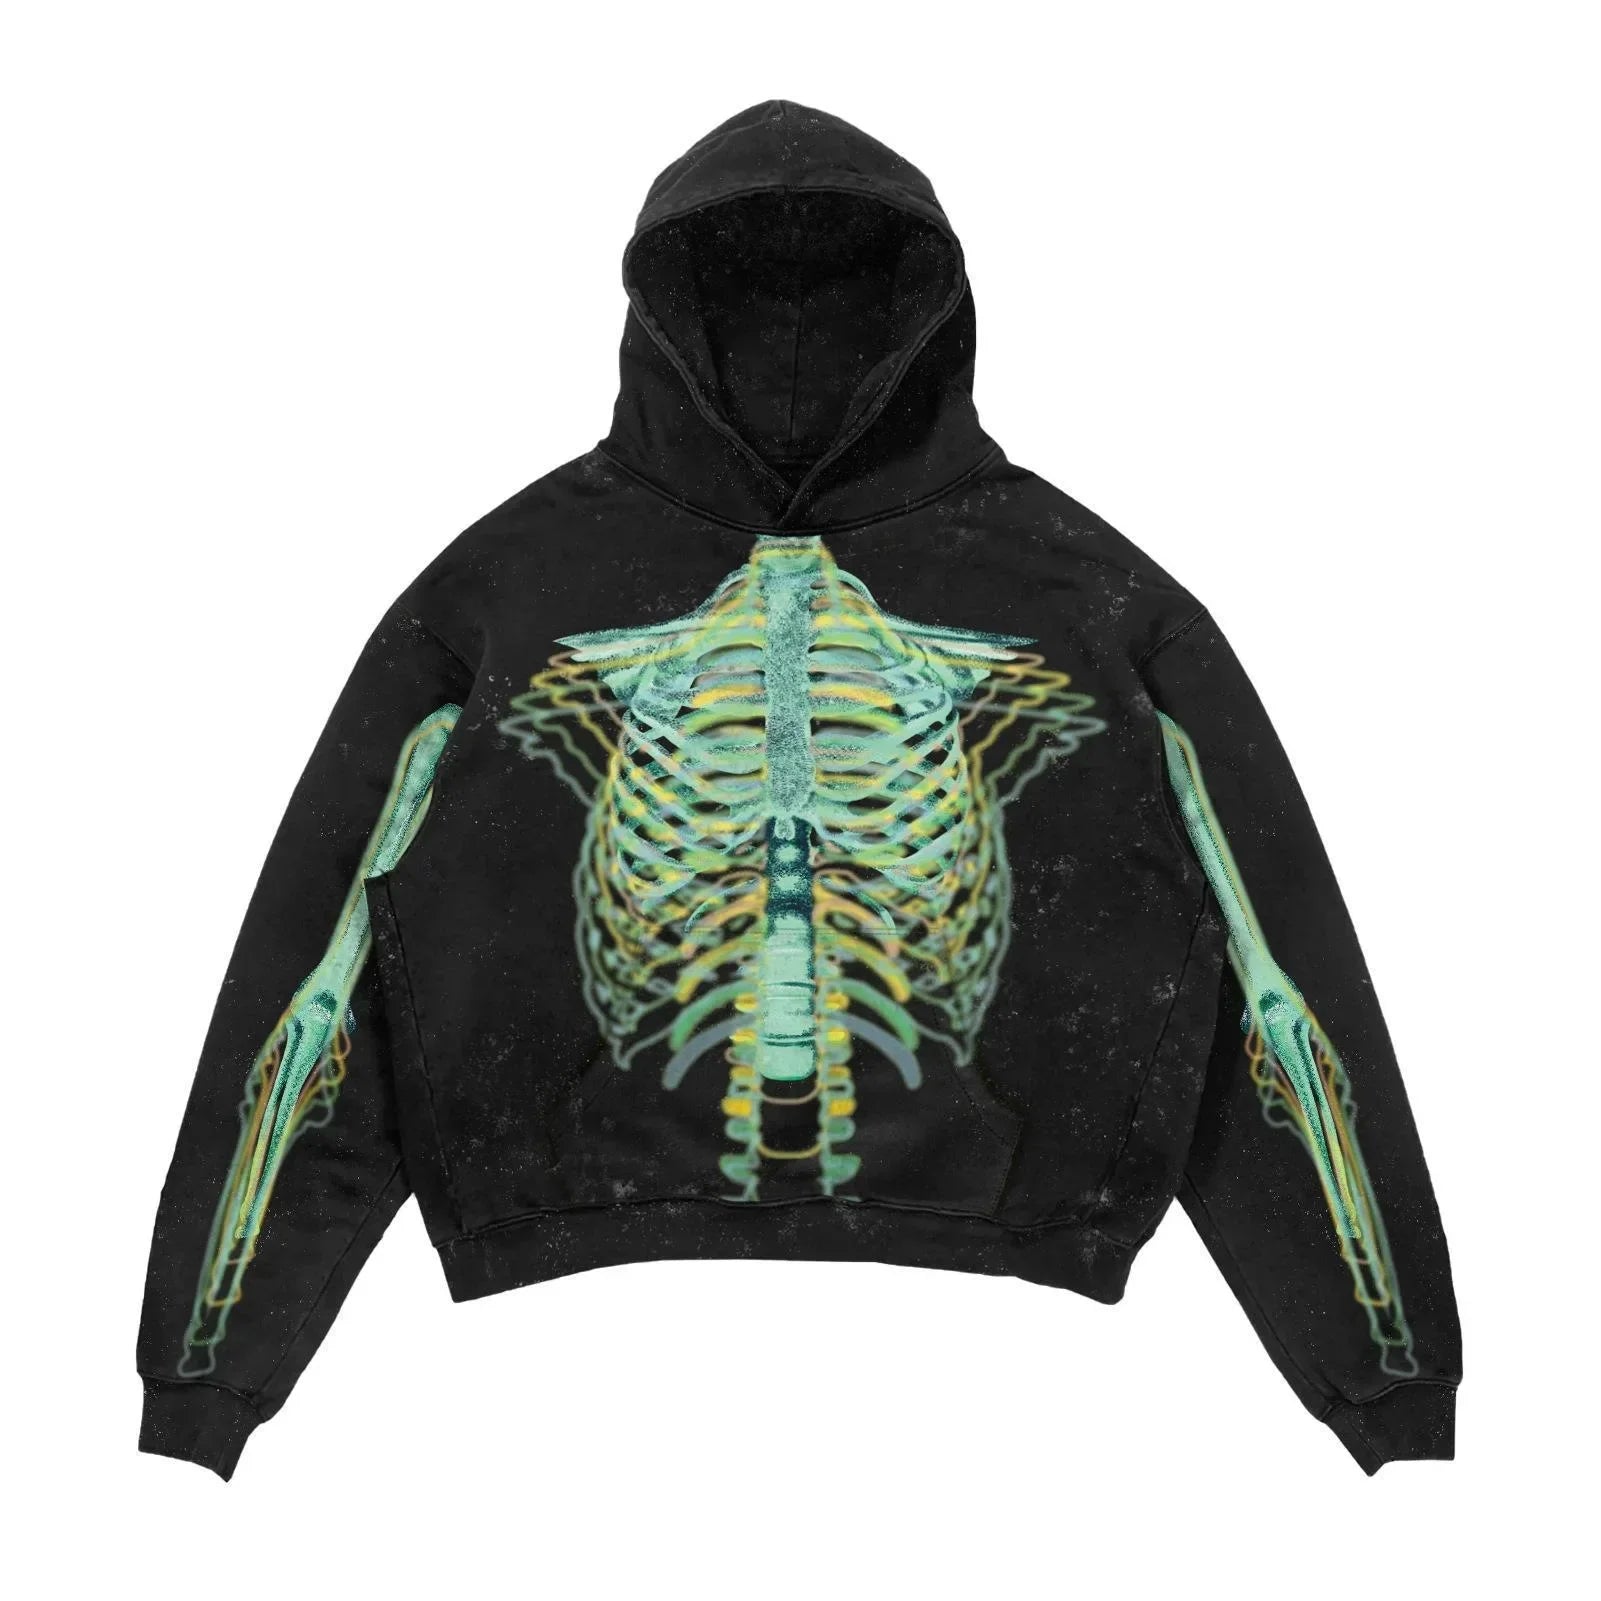 Maramalive™ Explosions Printed Skull Y2K Retro Hooded Sweater Coat Street Style Gothic Casual Fashion Hooded Sweater Men's Female, with a 3D skeleton print, featuring a detailed ribcage and arm bones design on the front. This men's hoodie embodies punk style with its drawstring hood and long sleeves, making it perfect for all four seasons.